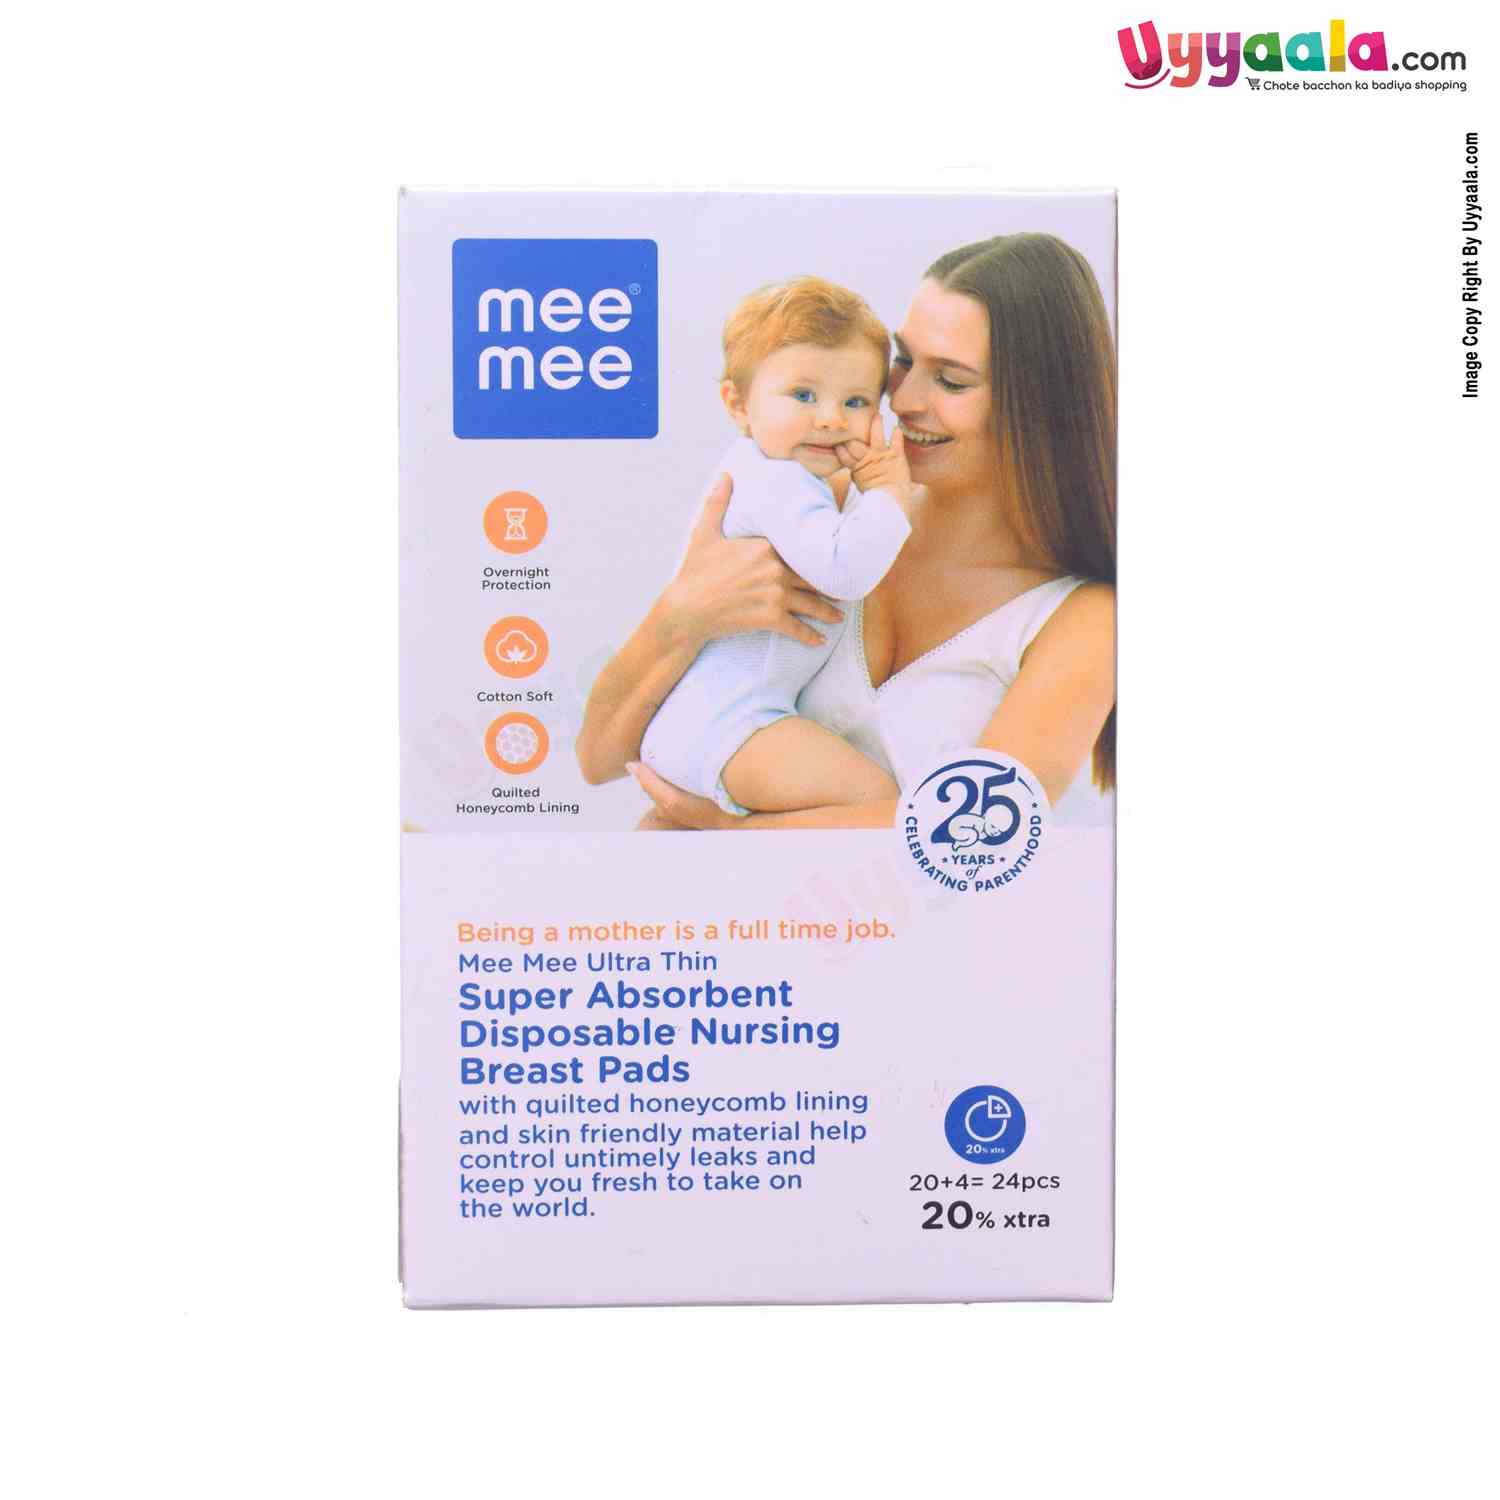 MEE MEE Super Absorbent Disposable Nursing Breast Pads - 24pcs